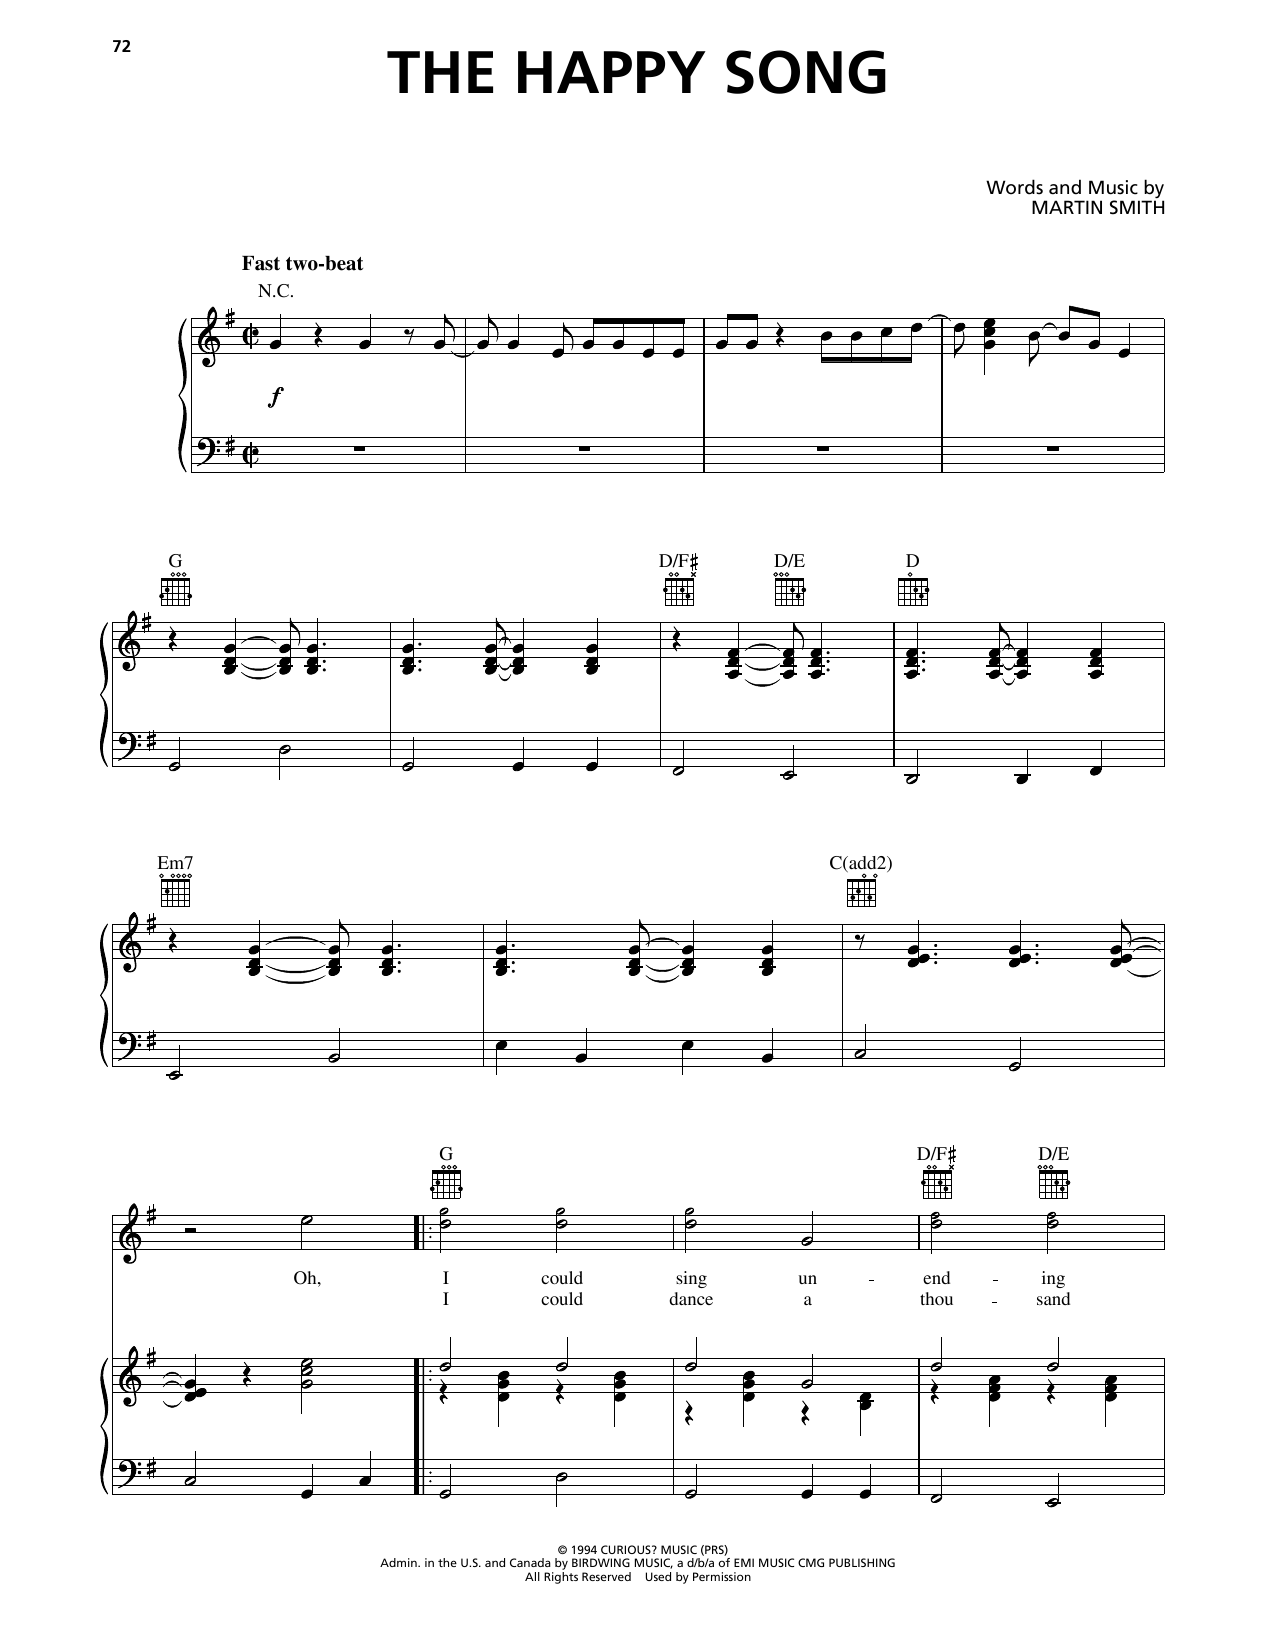 Download Delirious? The Happy Song Sheet Music